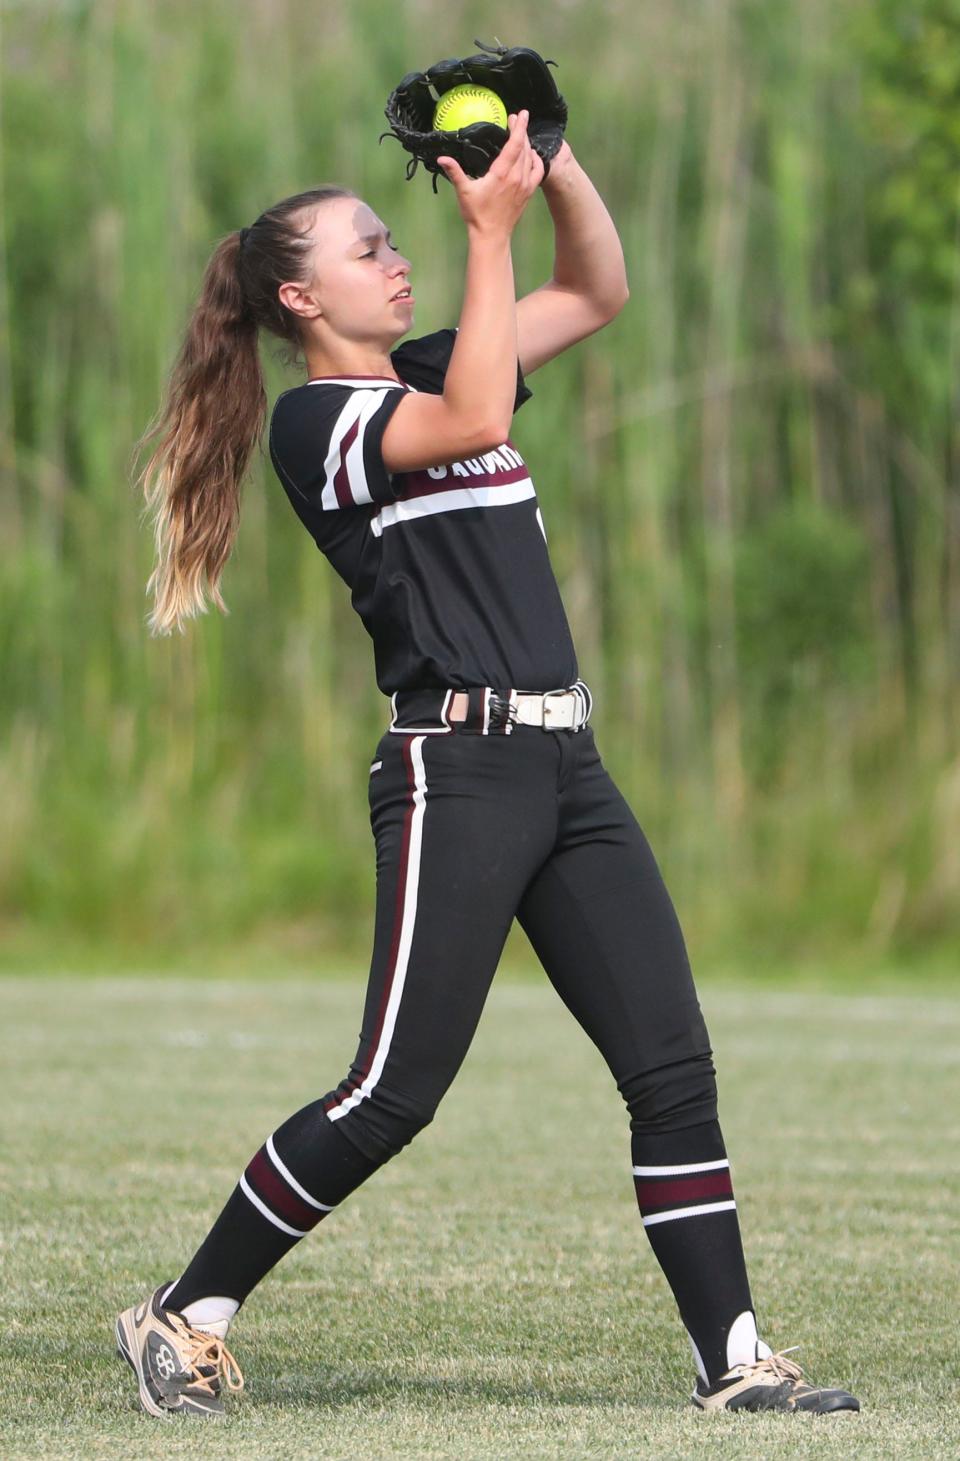 Appoquinimink's Izabella Rodriguez pulls in a fly ball for an out in the Jaguars' 7-2 win against Conrad in the DIAA state tournament opening round, Tuesday, May 23, 2023 at Appoquinimink.